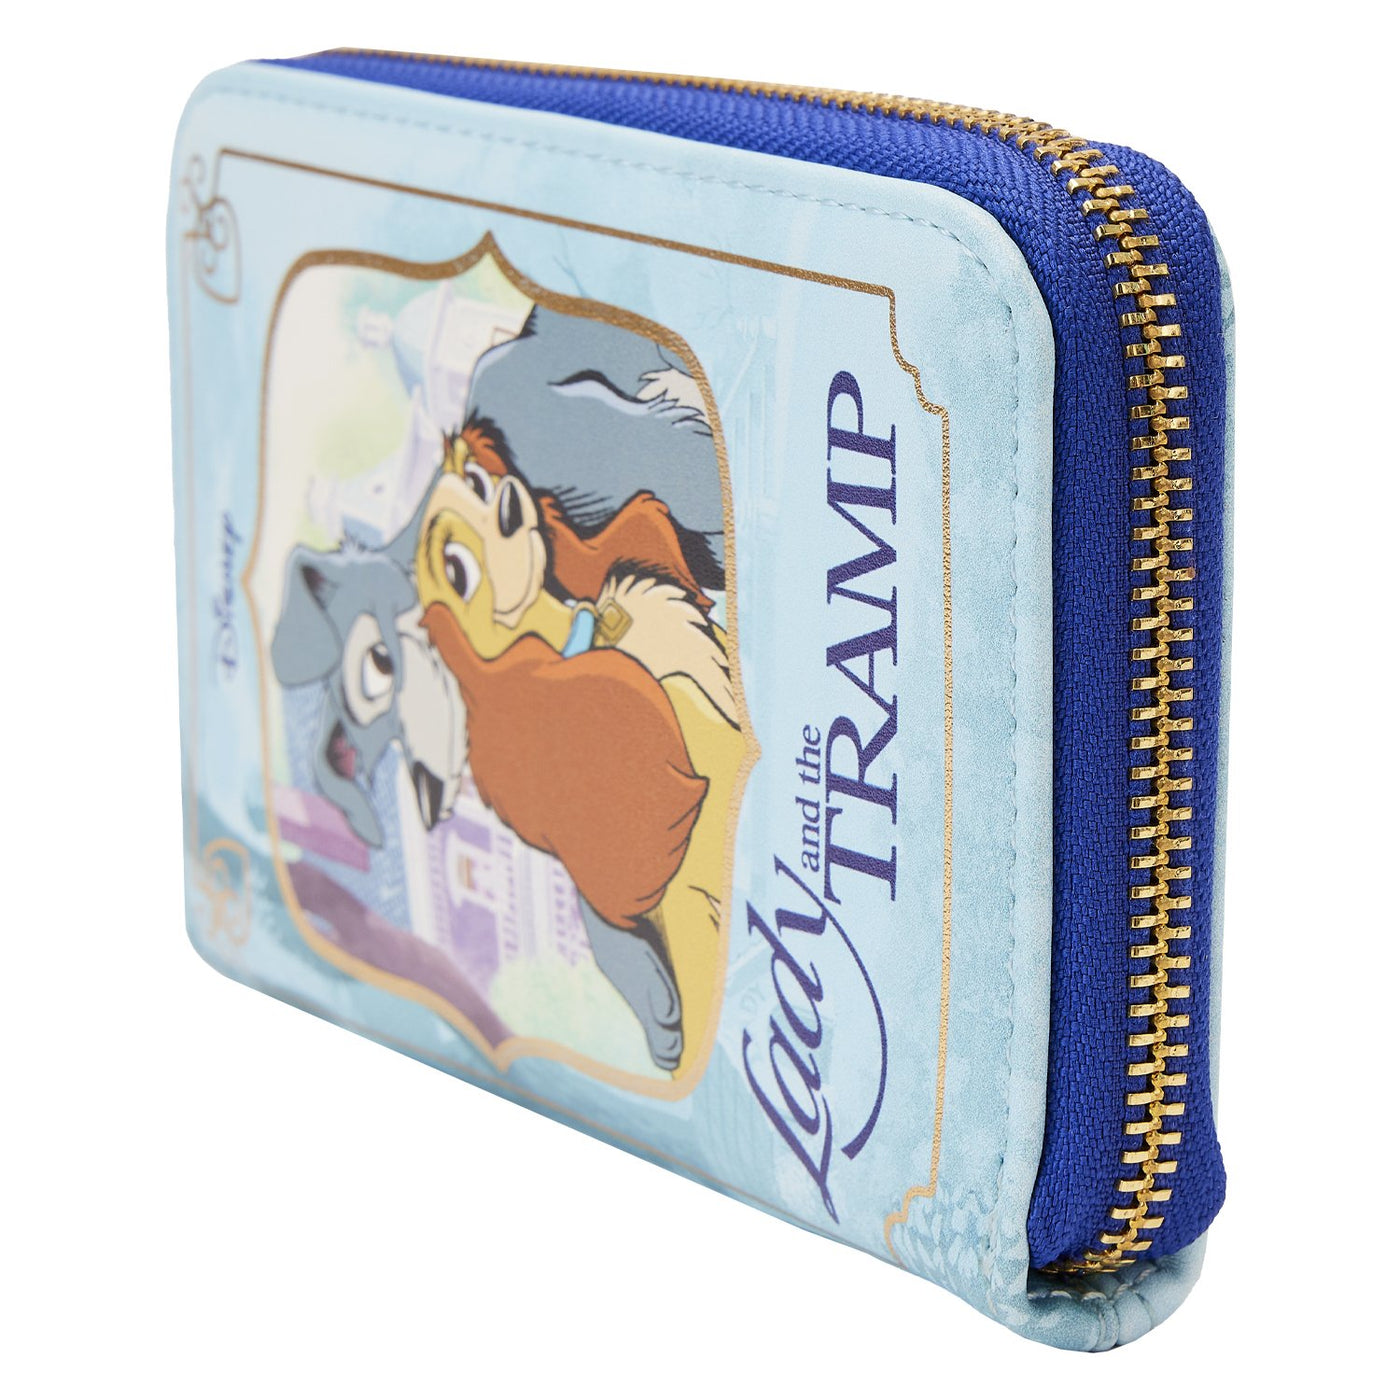 671803448384 - Loungefly Disney Lady and the Tramp Classic Book Zip-Around Wallet - Side View